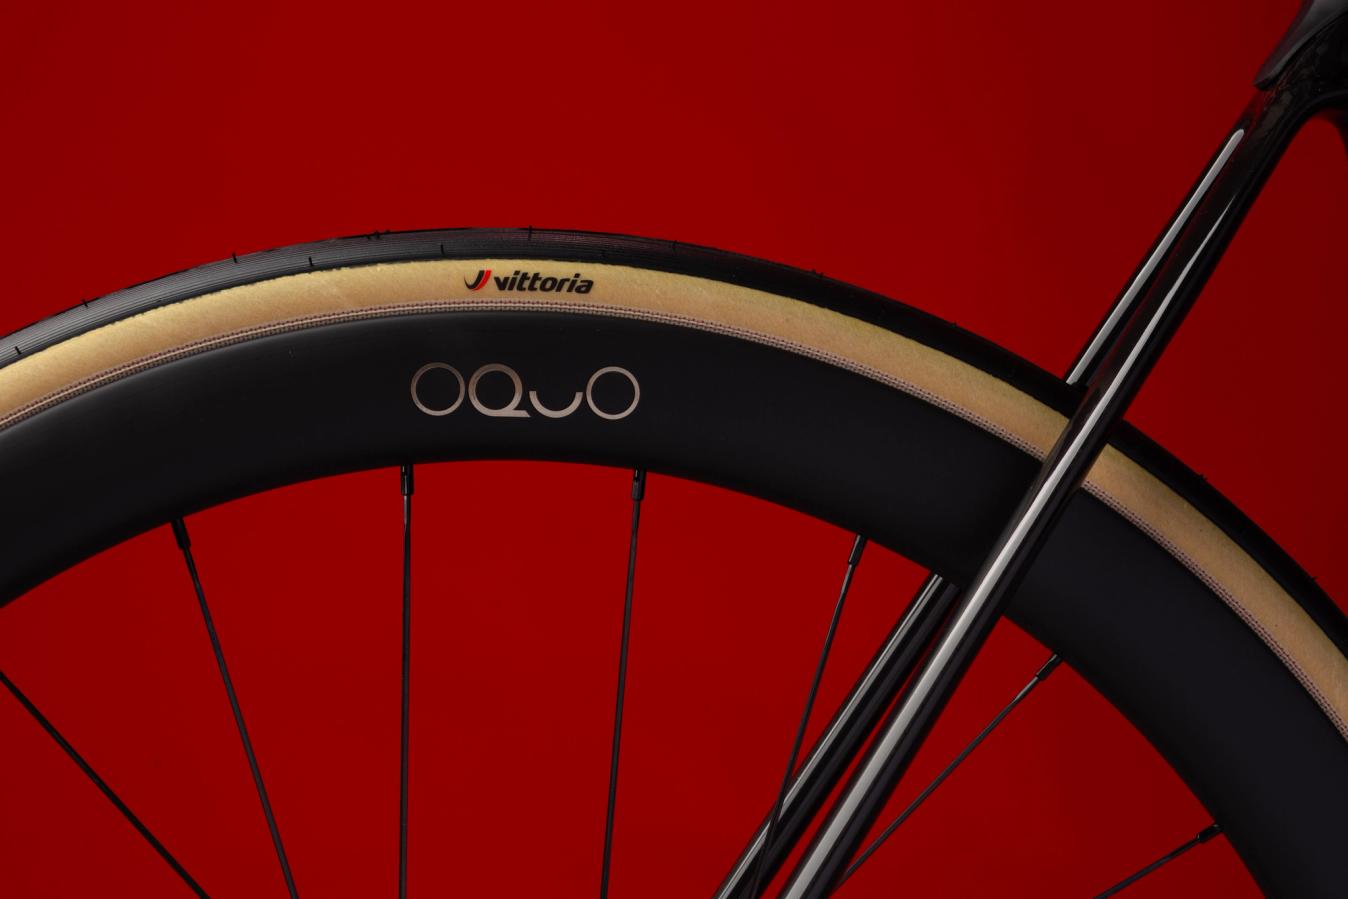 Obrea's own brand Oquo wheels make a professional debut with the team this year